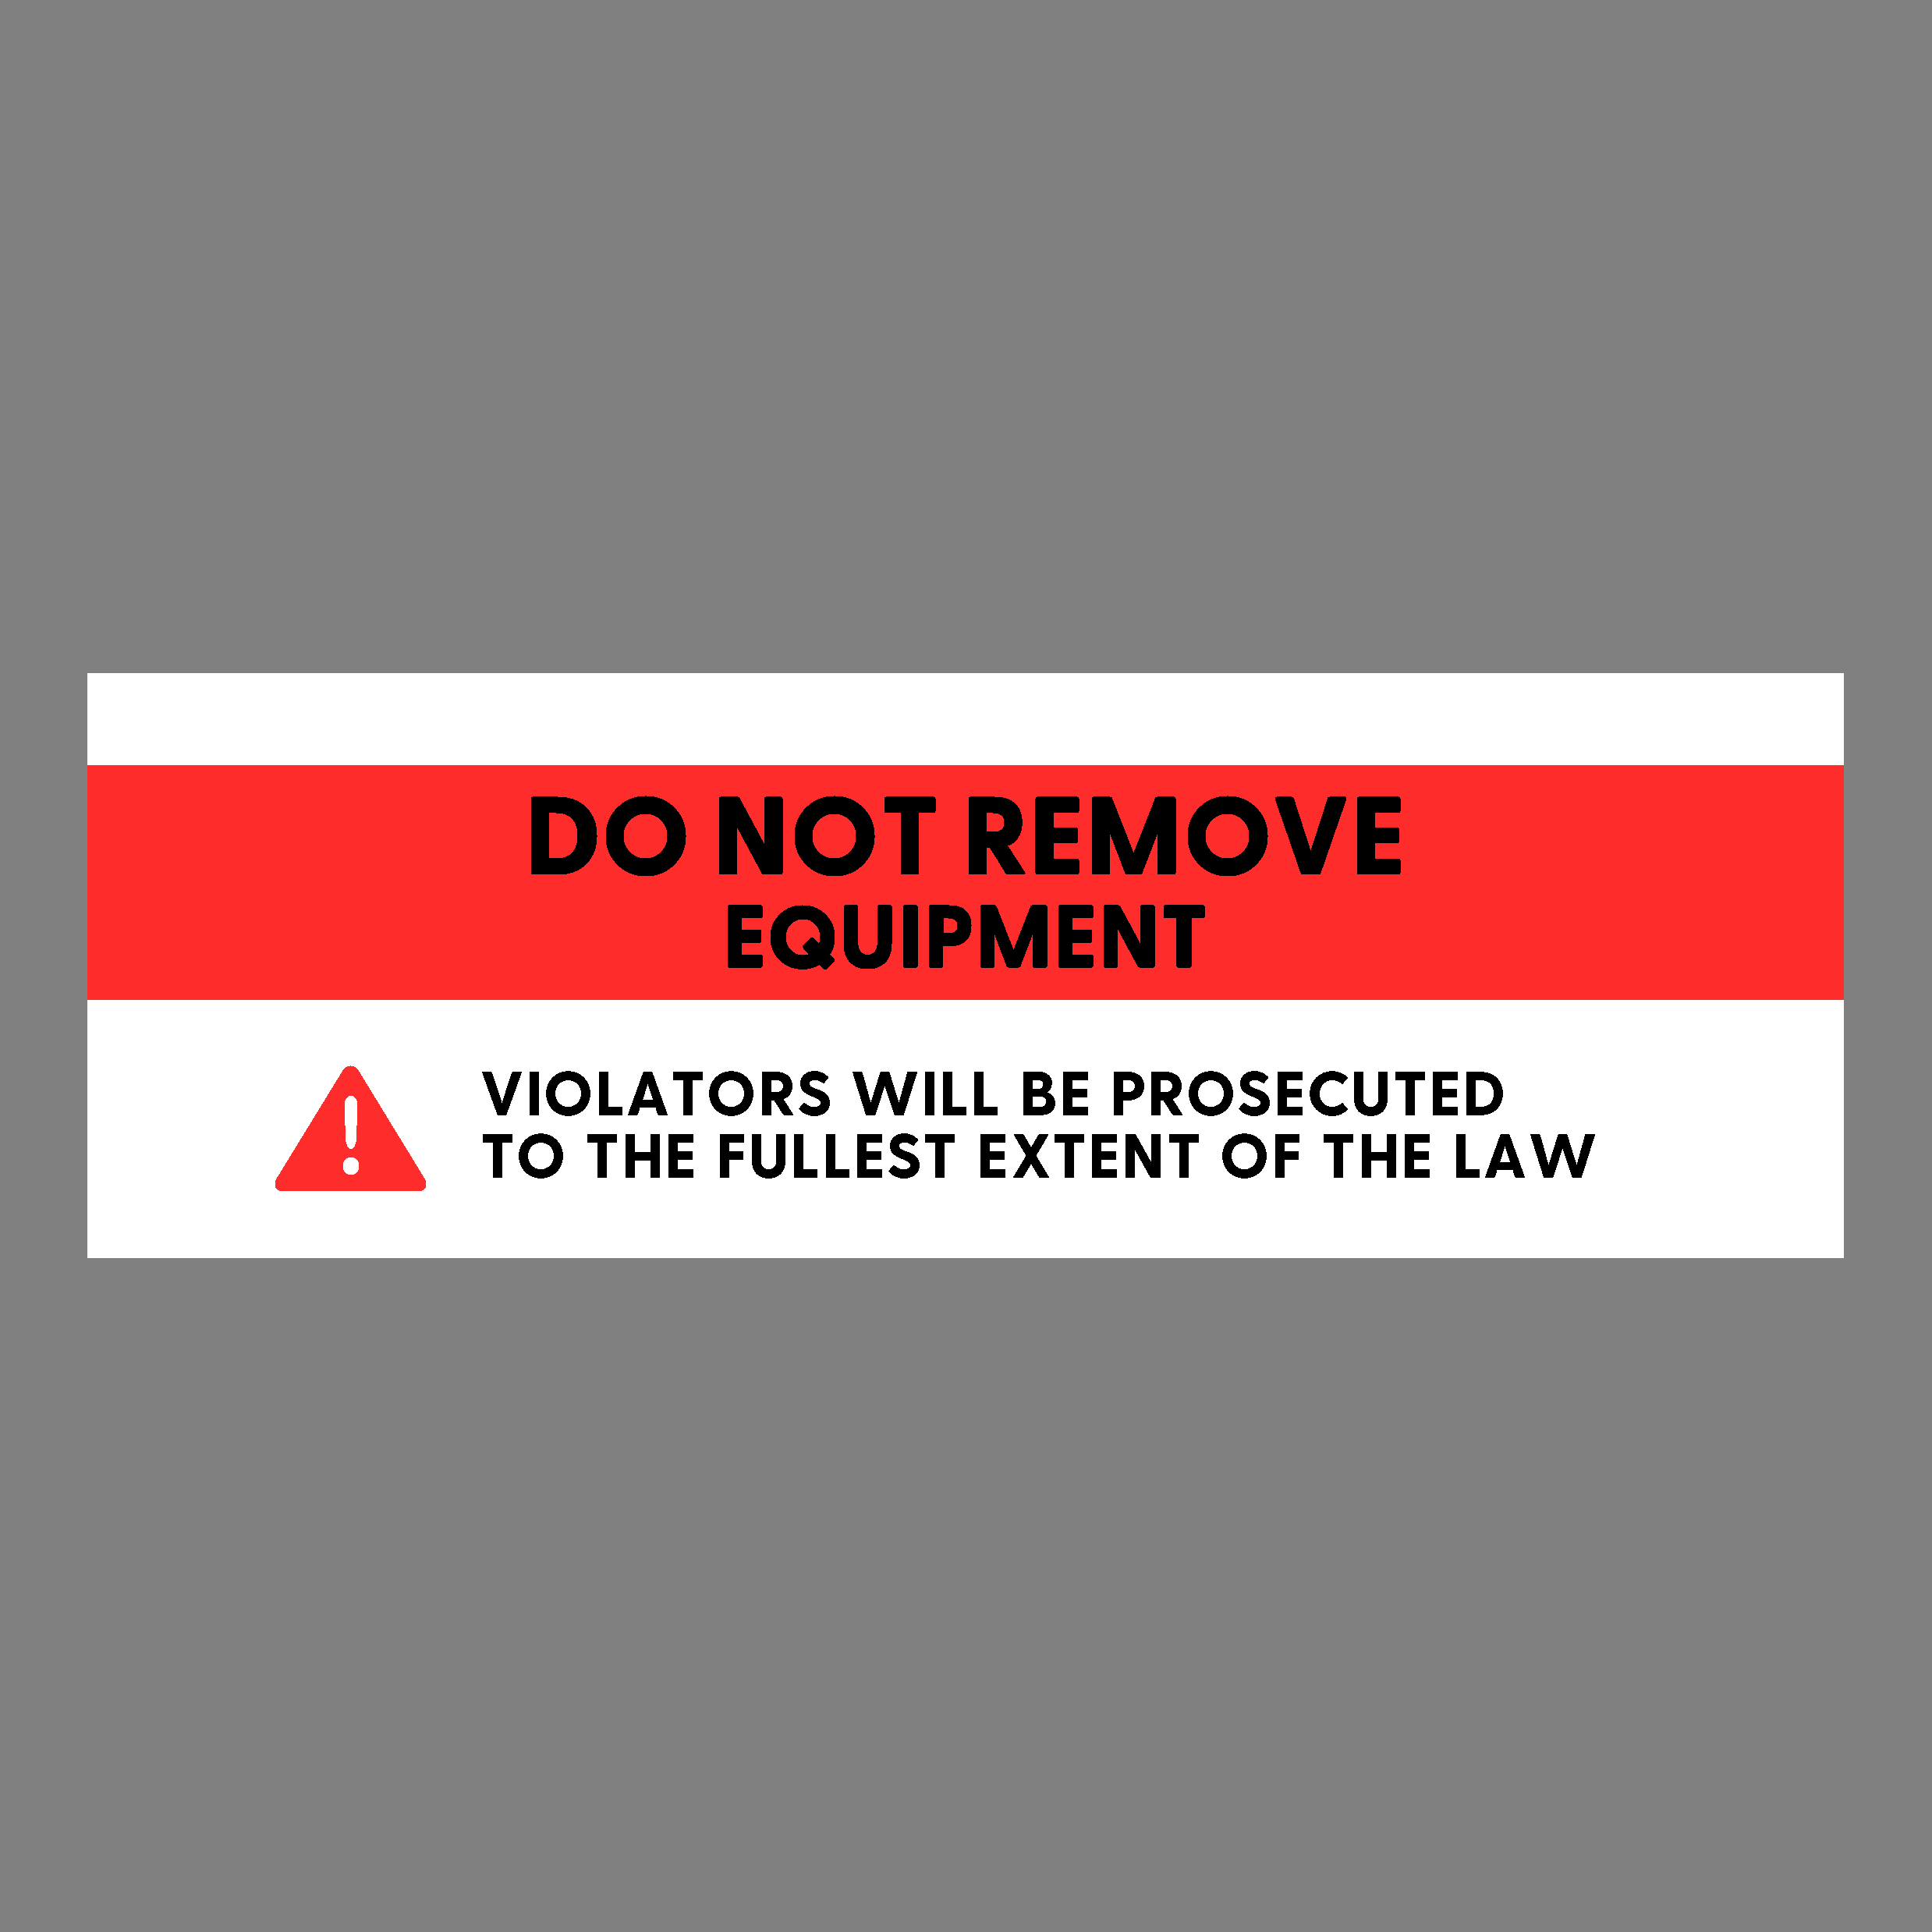 Sunroom Rentals Product Image Do Not Remove Decal 25x75